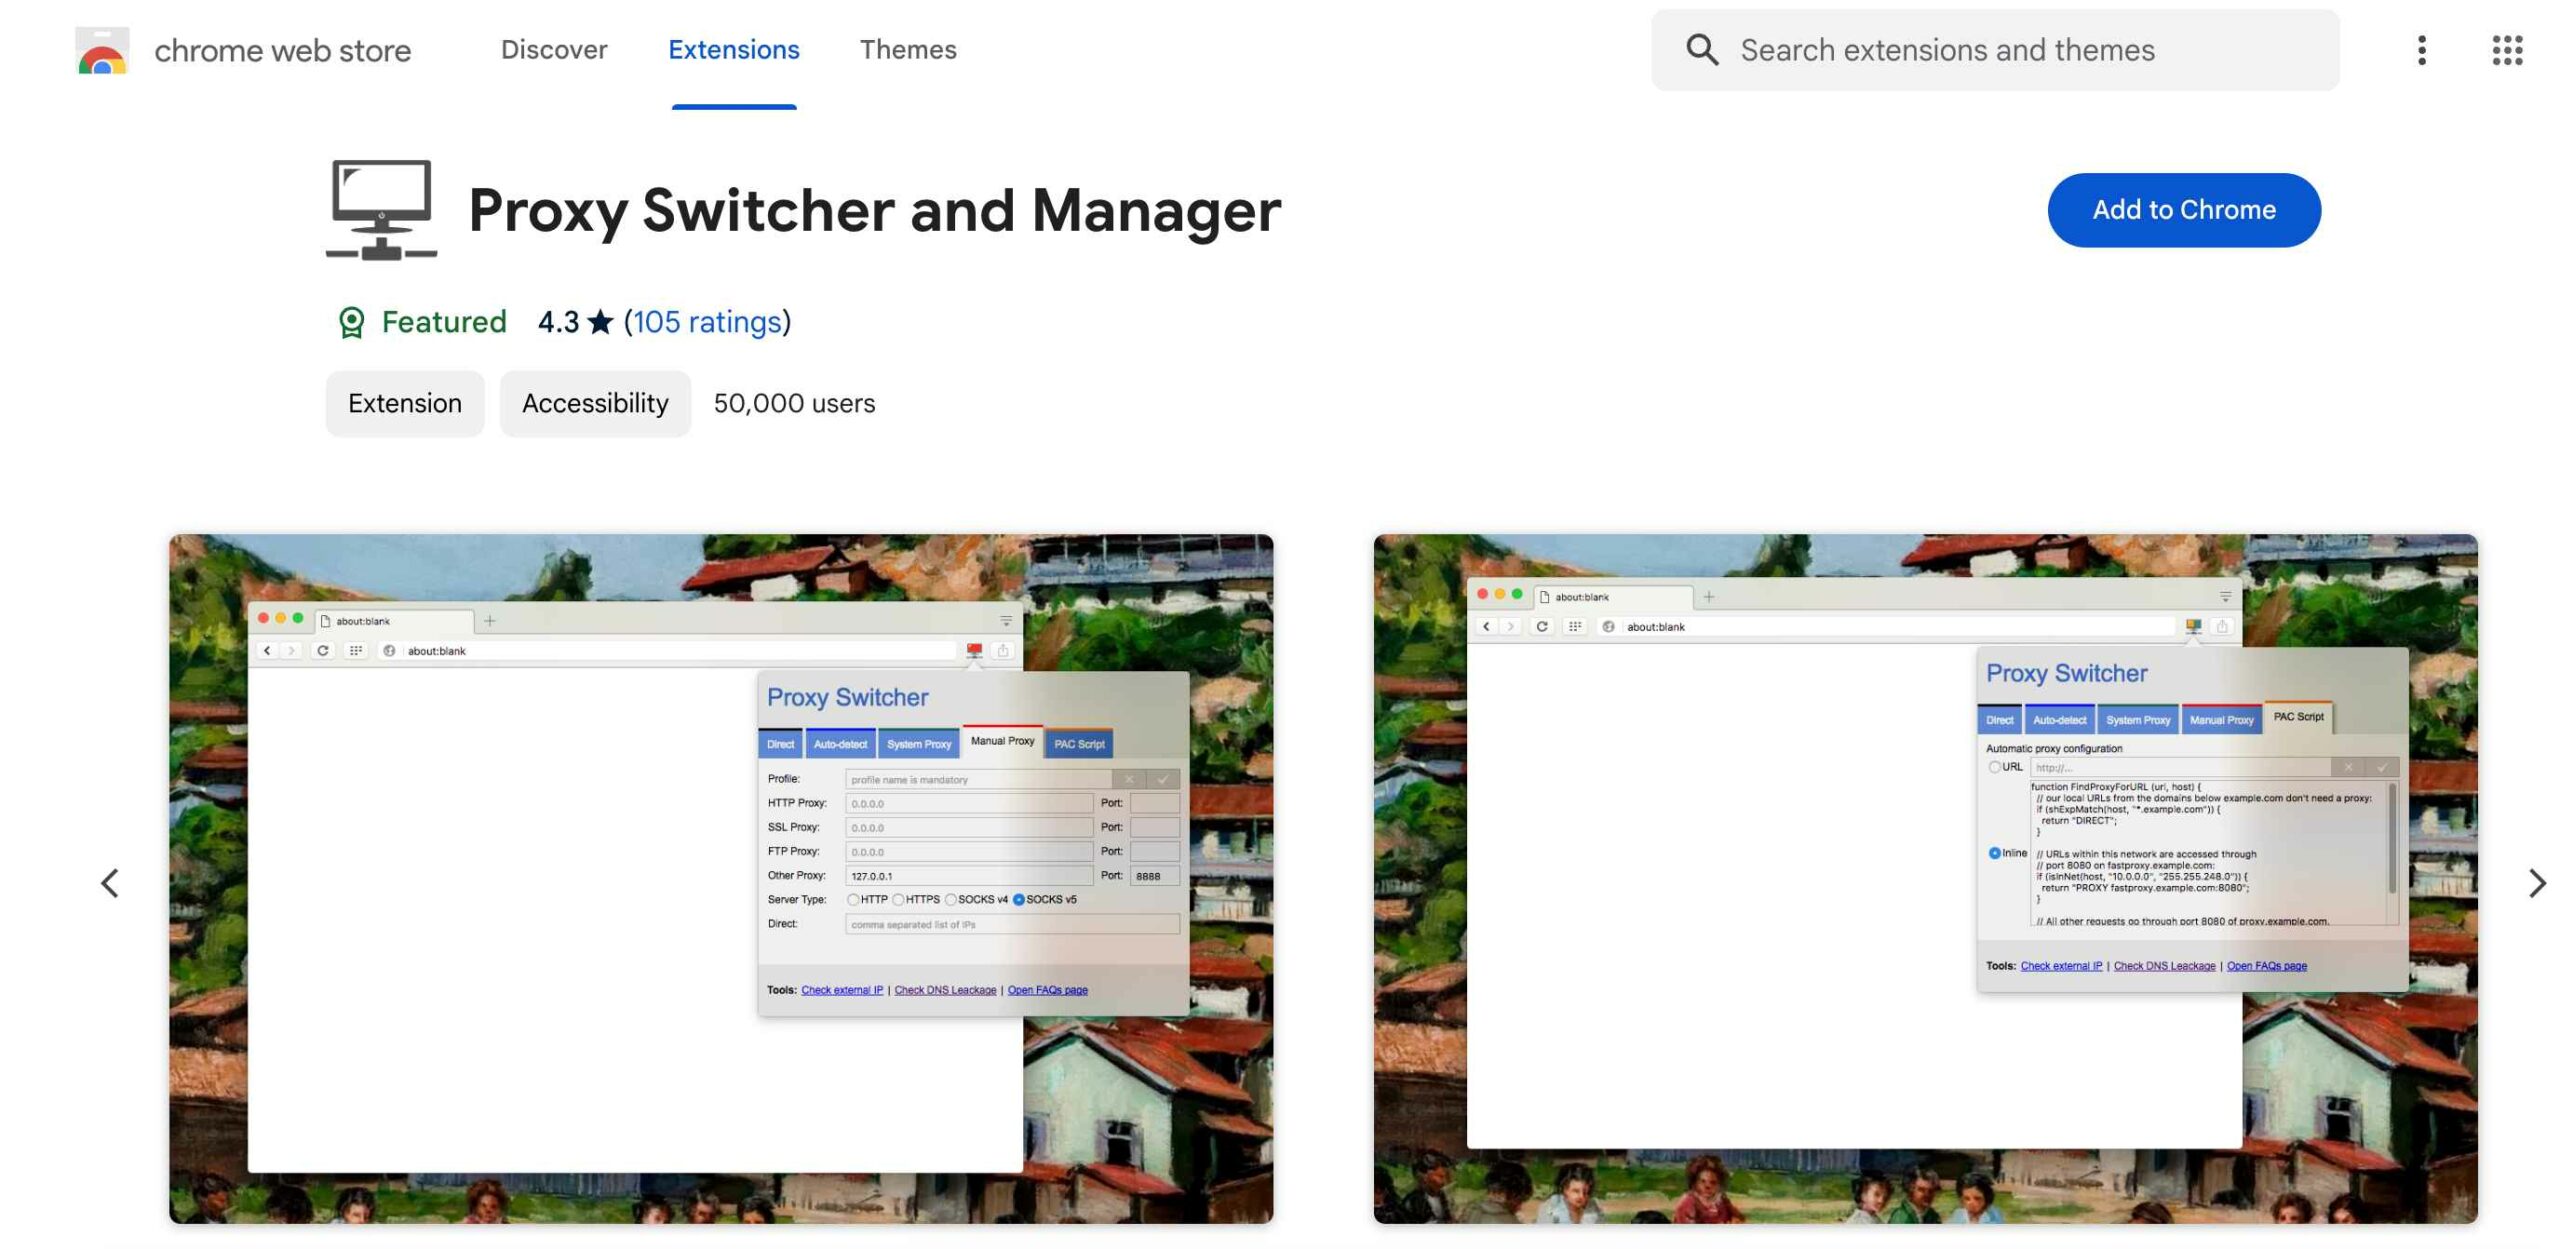 Overview Of Proxy Switcher and Manager